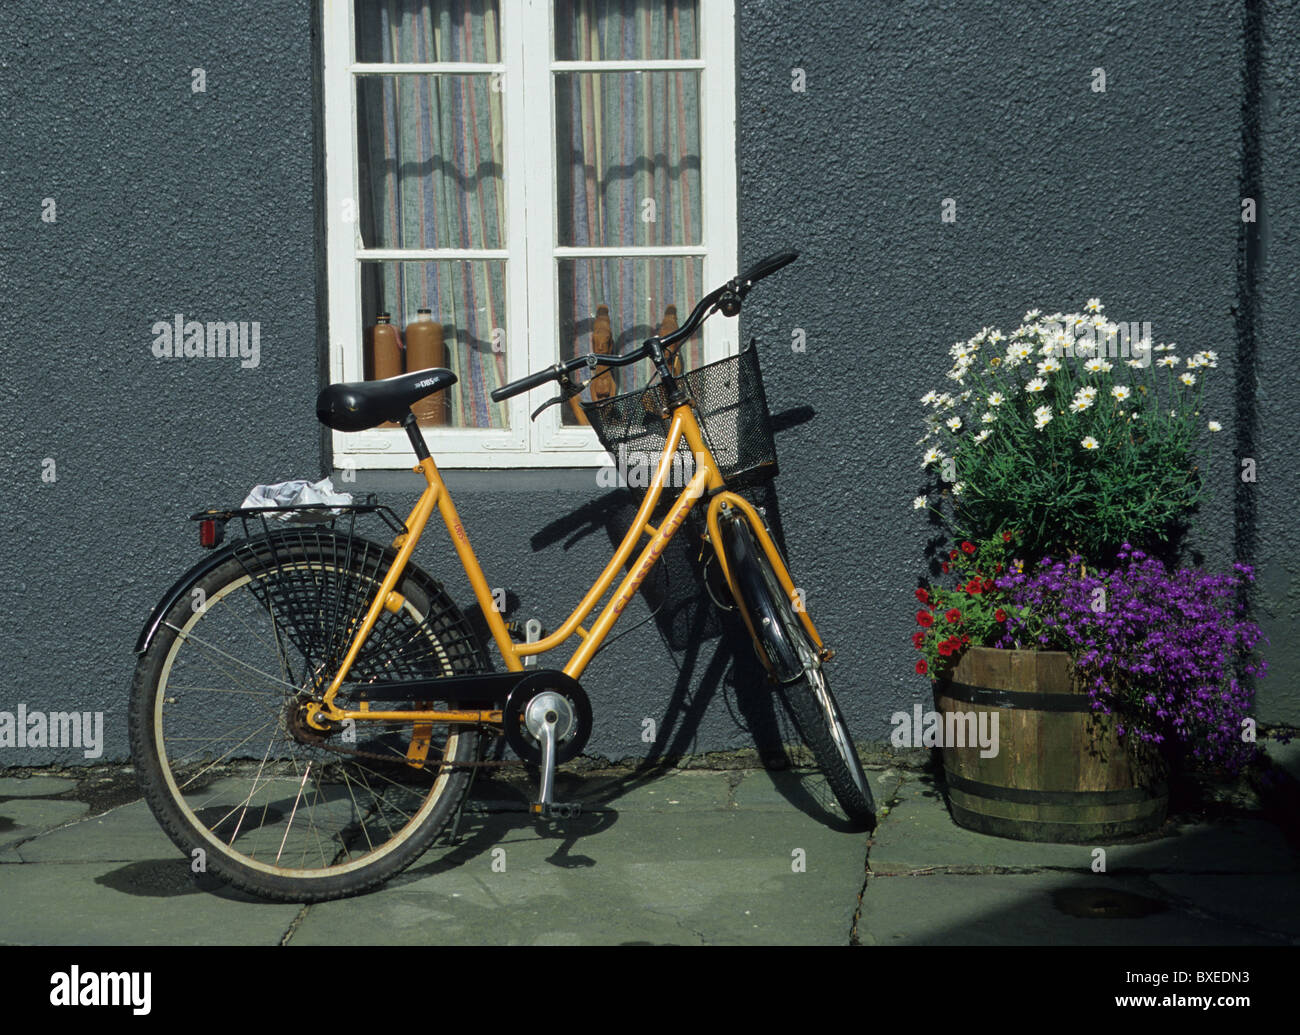 Parked yellow bike, gray wall, flowers in a barrel, sun, summer Stock Photo